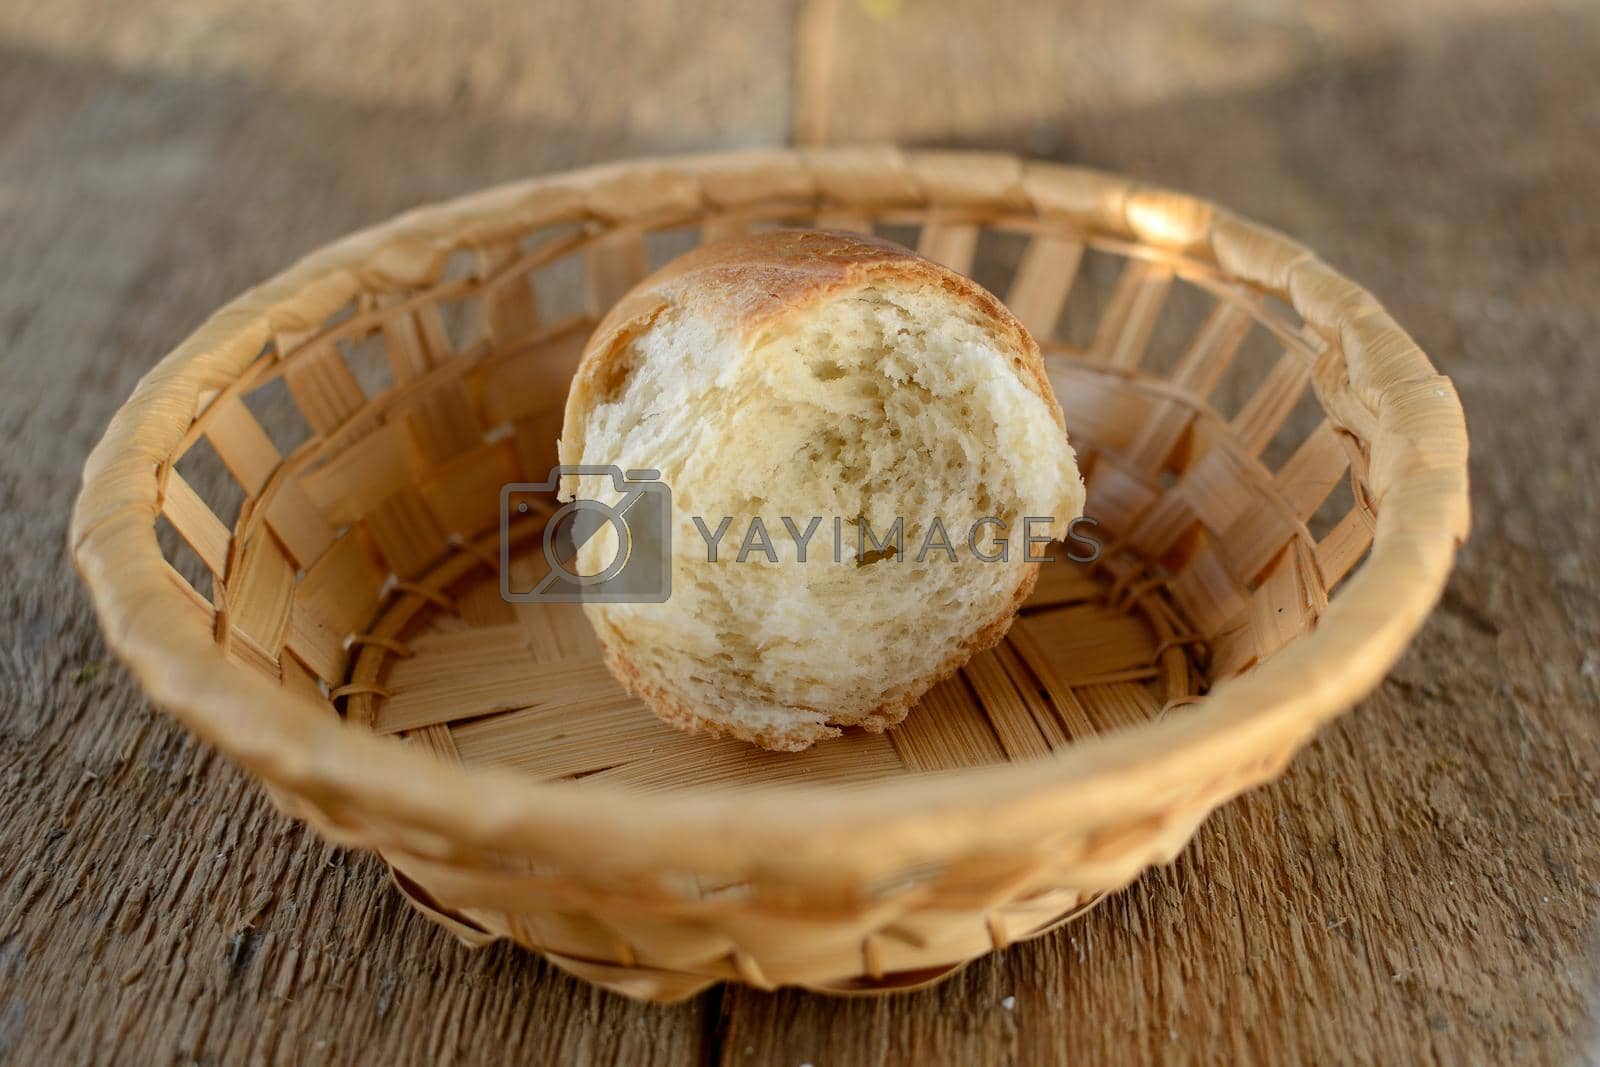 Royalty free image of A piece of bread for the diet by wolfhound9111